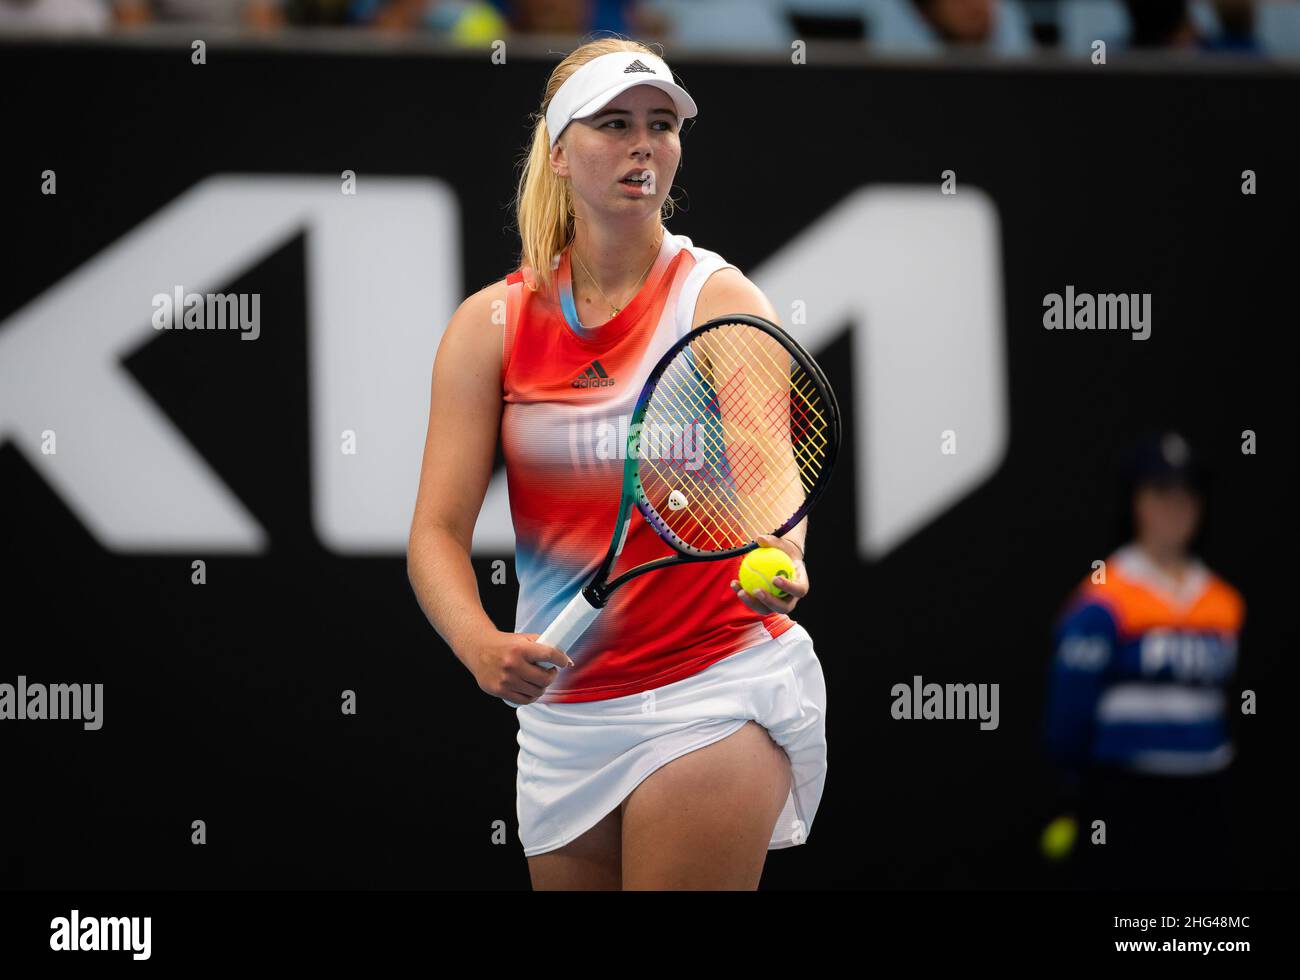 18th January 2022. Clara Tauson of Denmark in action against Astra Sharma of Australia during the first round of the 2022 Australian Open, WTA Grand Slam tennis tournament on January 18, 2022 at Melbourne Park in Melbourne, Australia - Photo: Rob Prange/DPPI/LiveMedia Credit: Independent Photo Agency/Alamy Live News Stock Photo